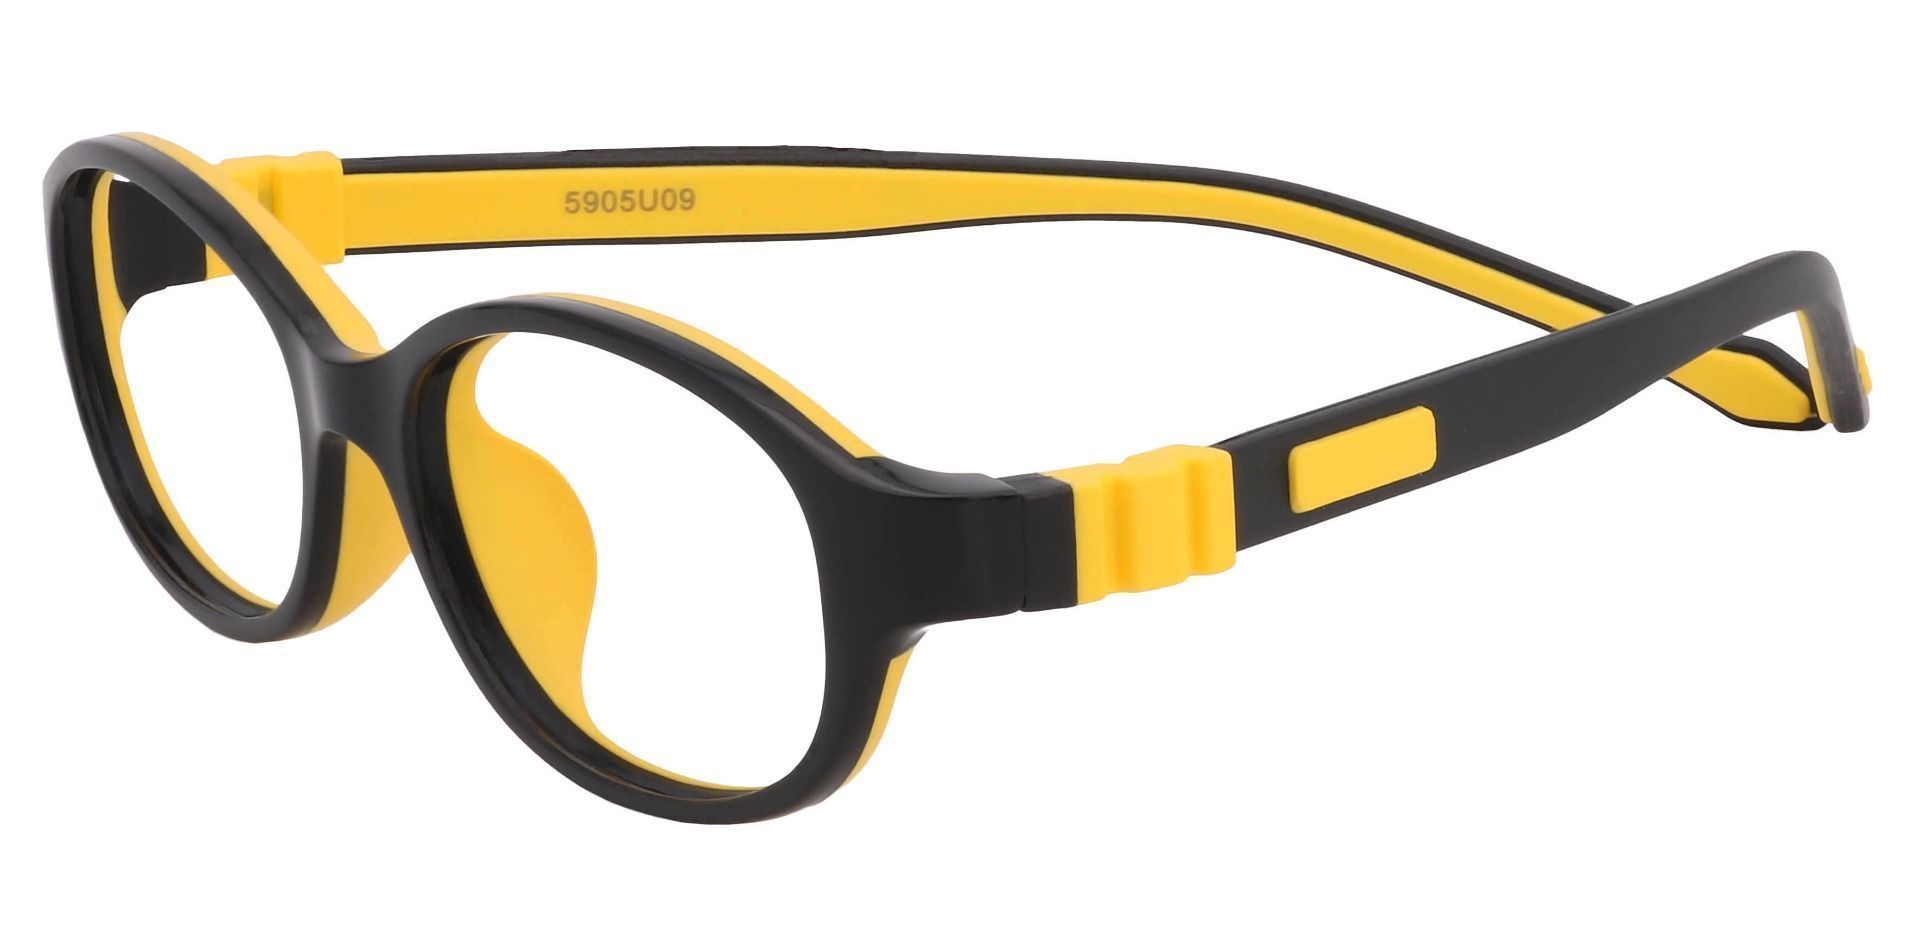 Stone Oval Eyeglasses Frame - The Frame Is Black And Yellow